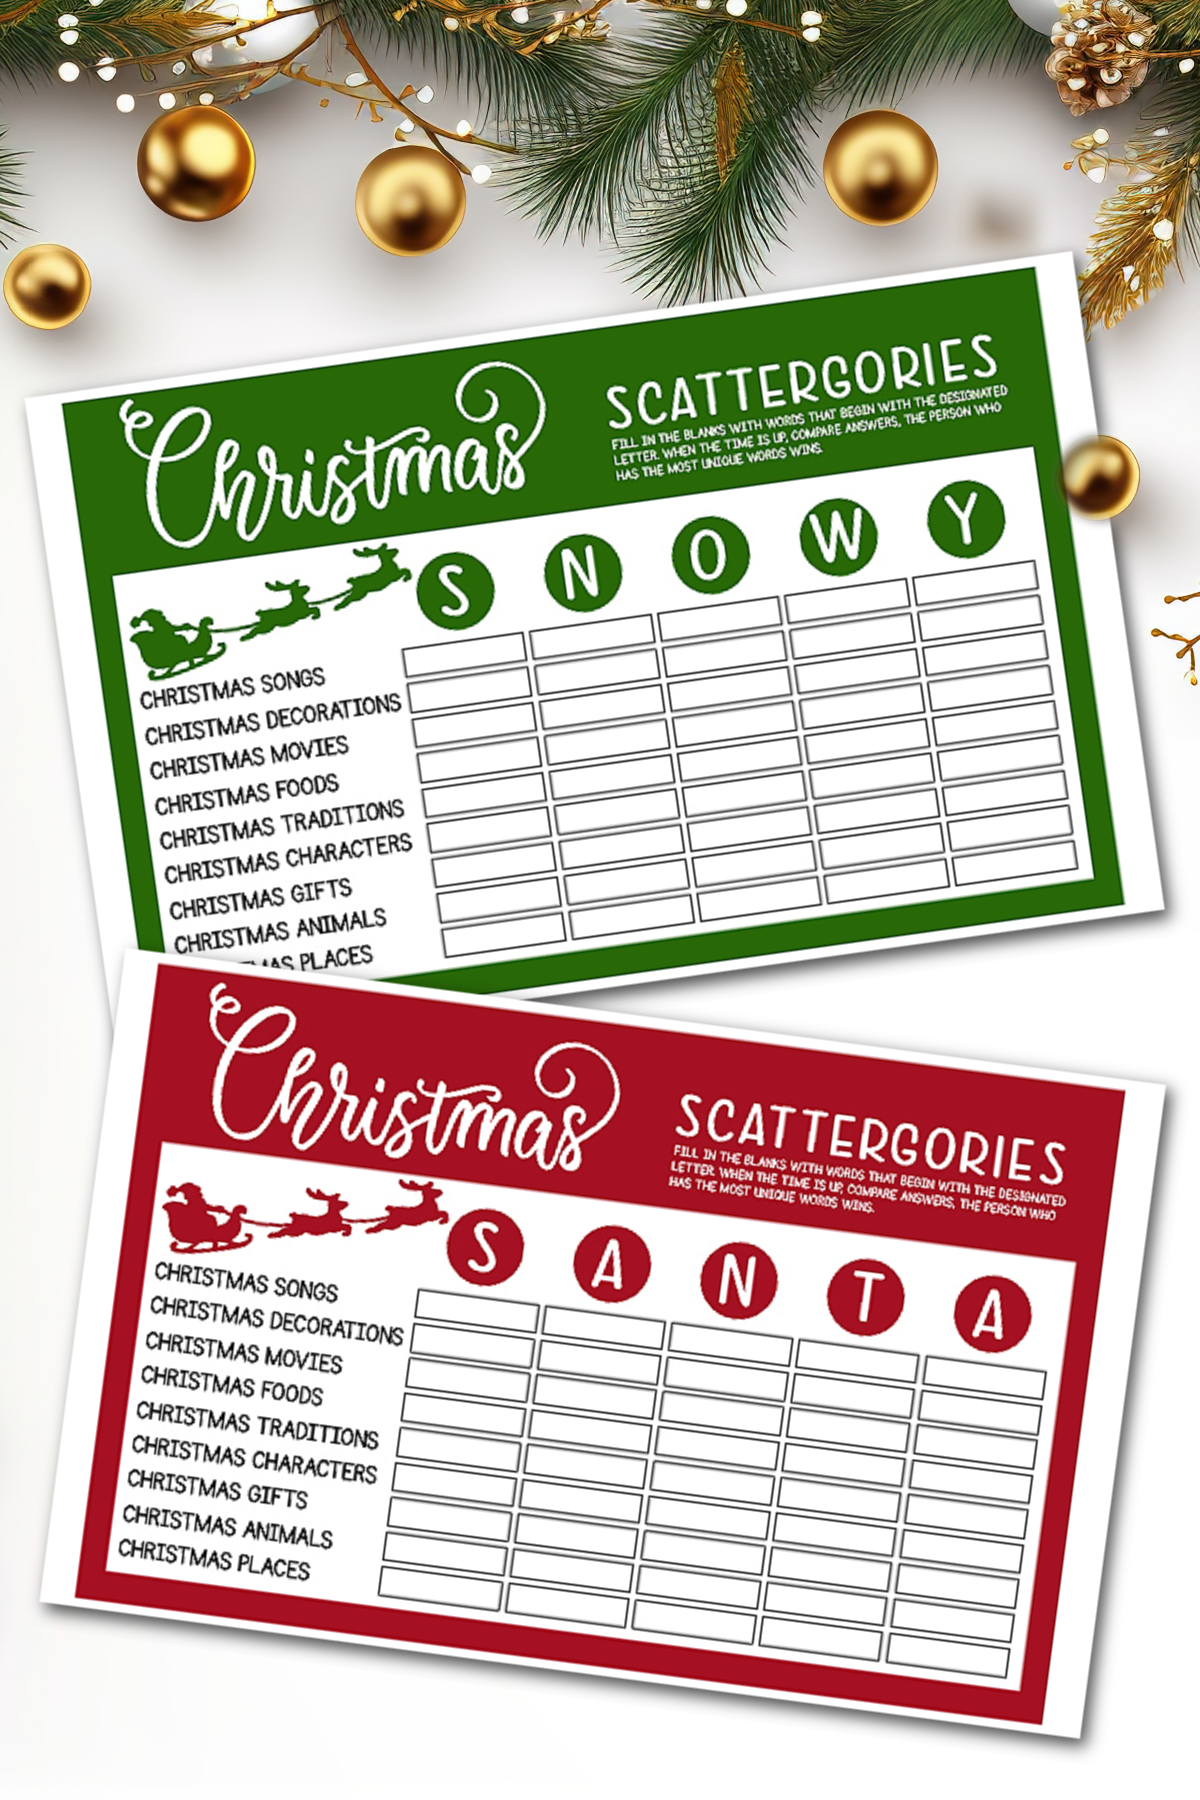 Christmas scattergories game printables.